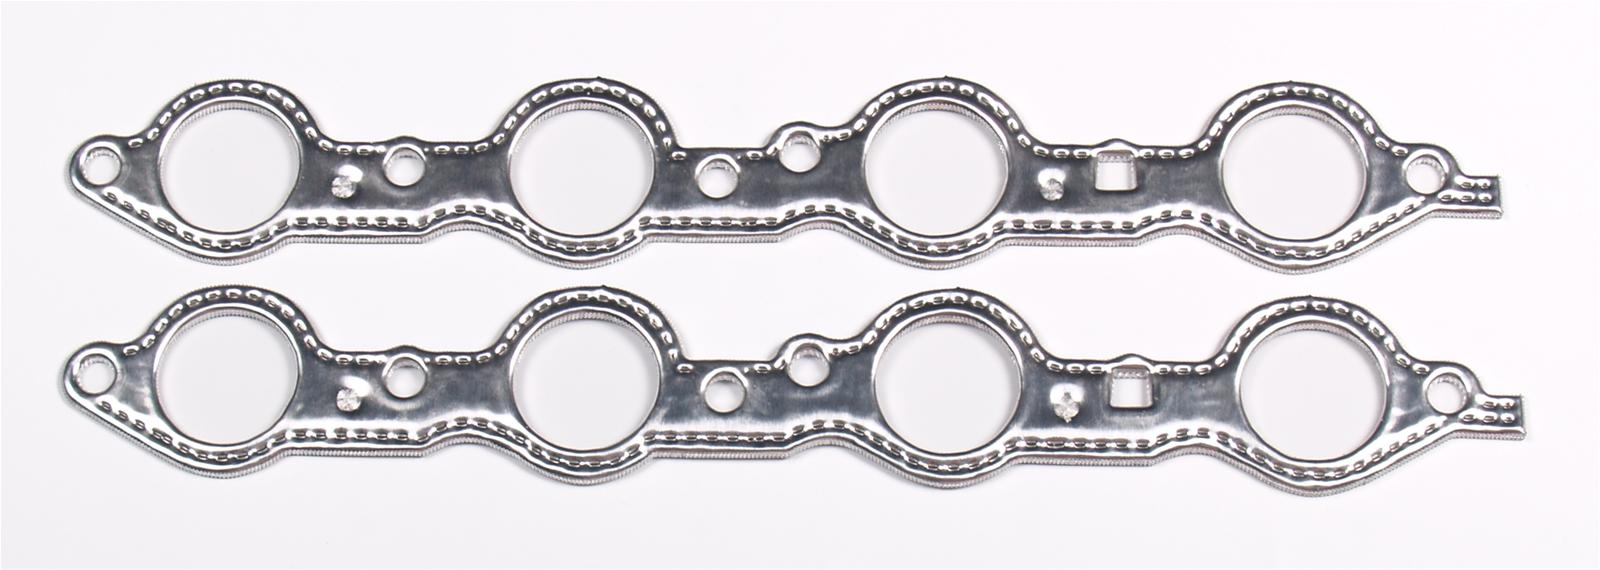 98-02 LS1 Percy Exhaust Manifold Gaskets